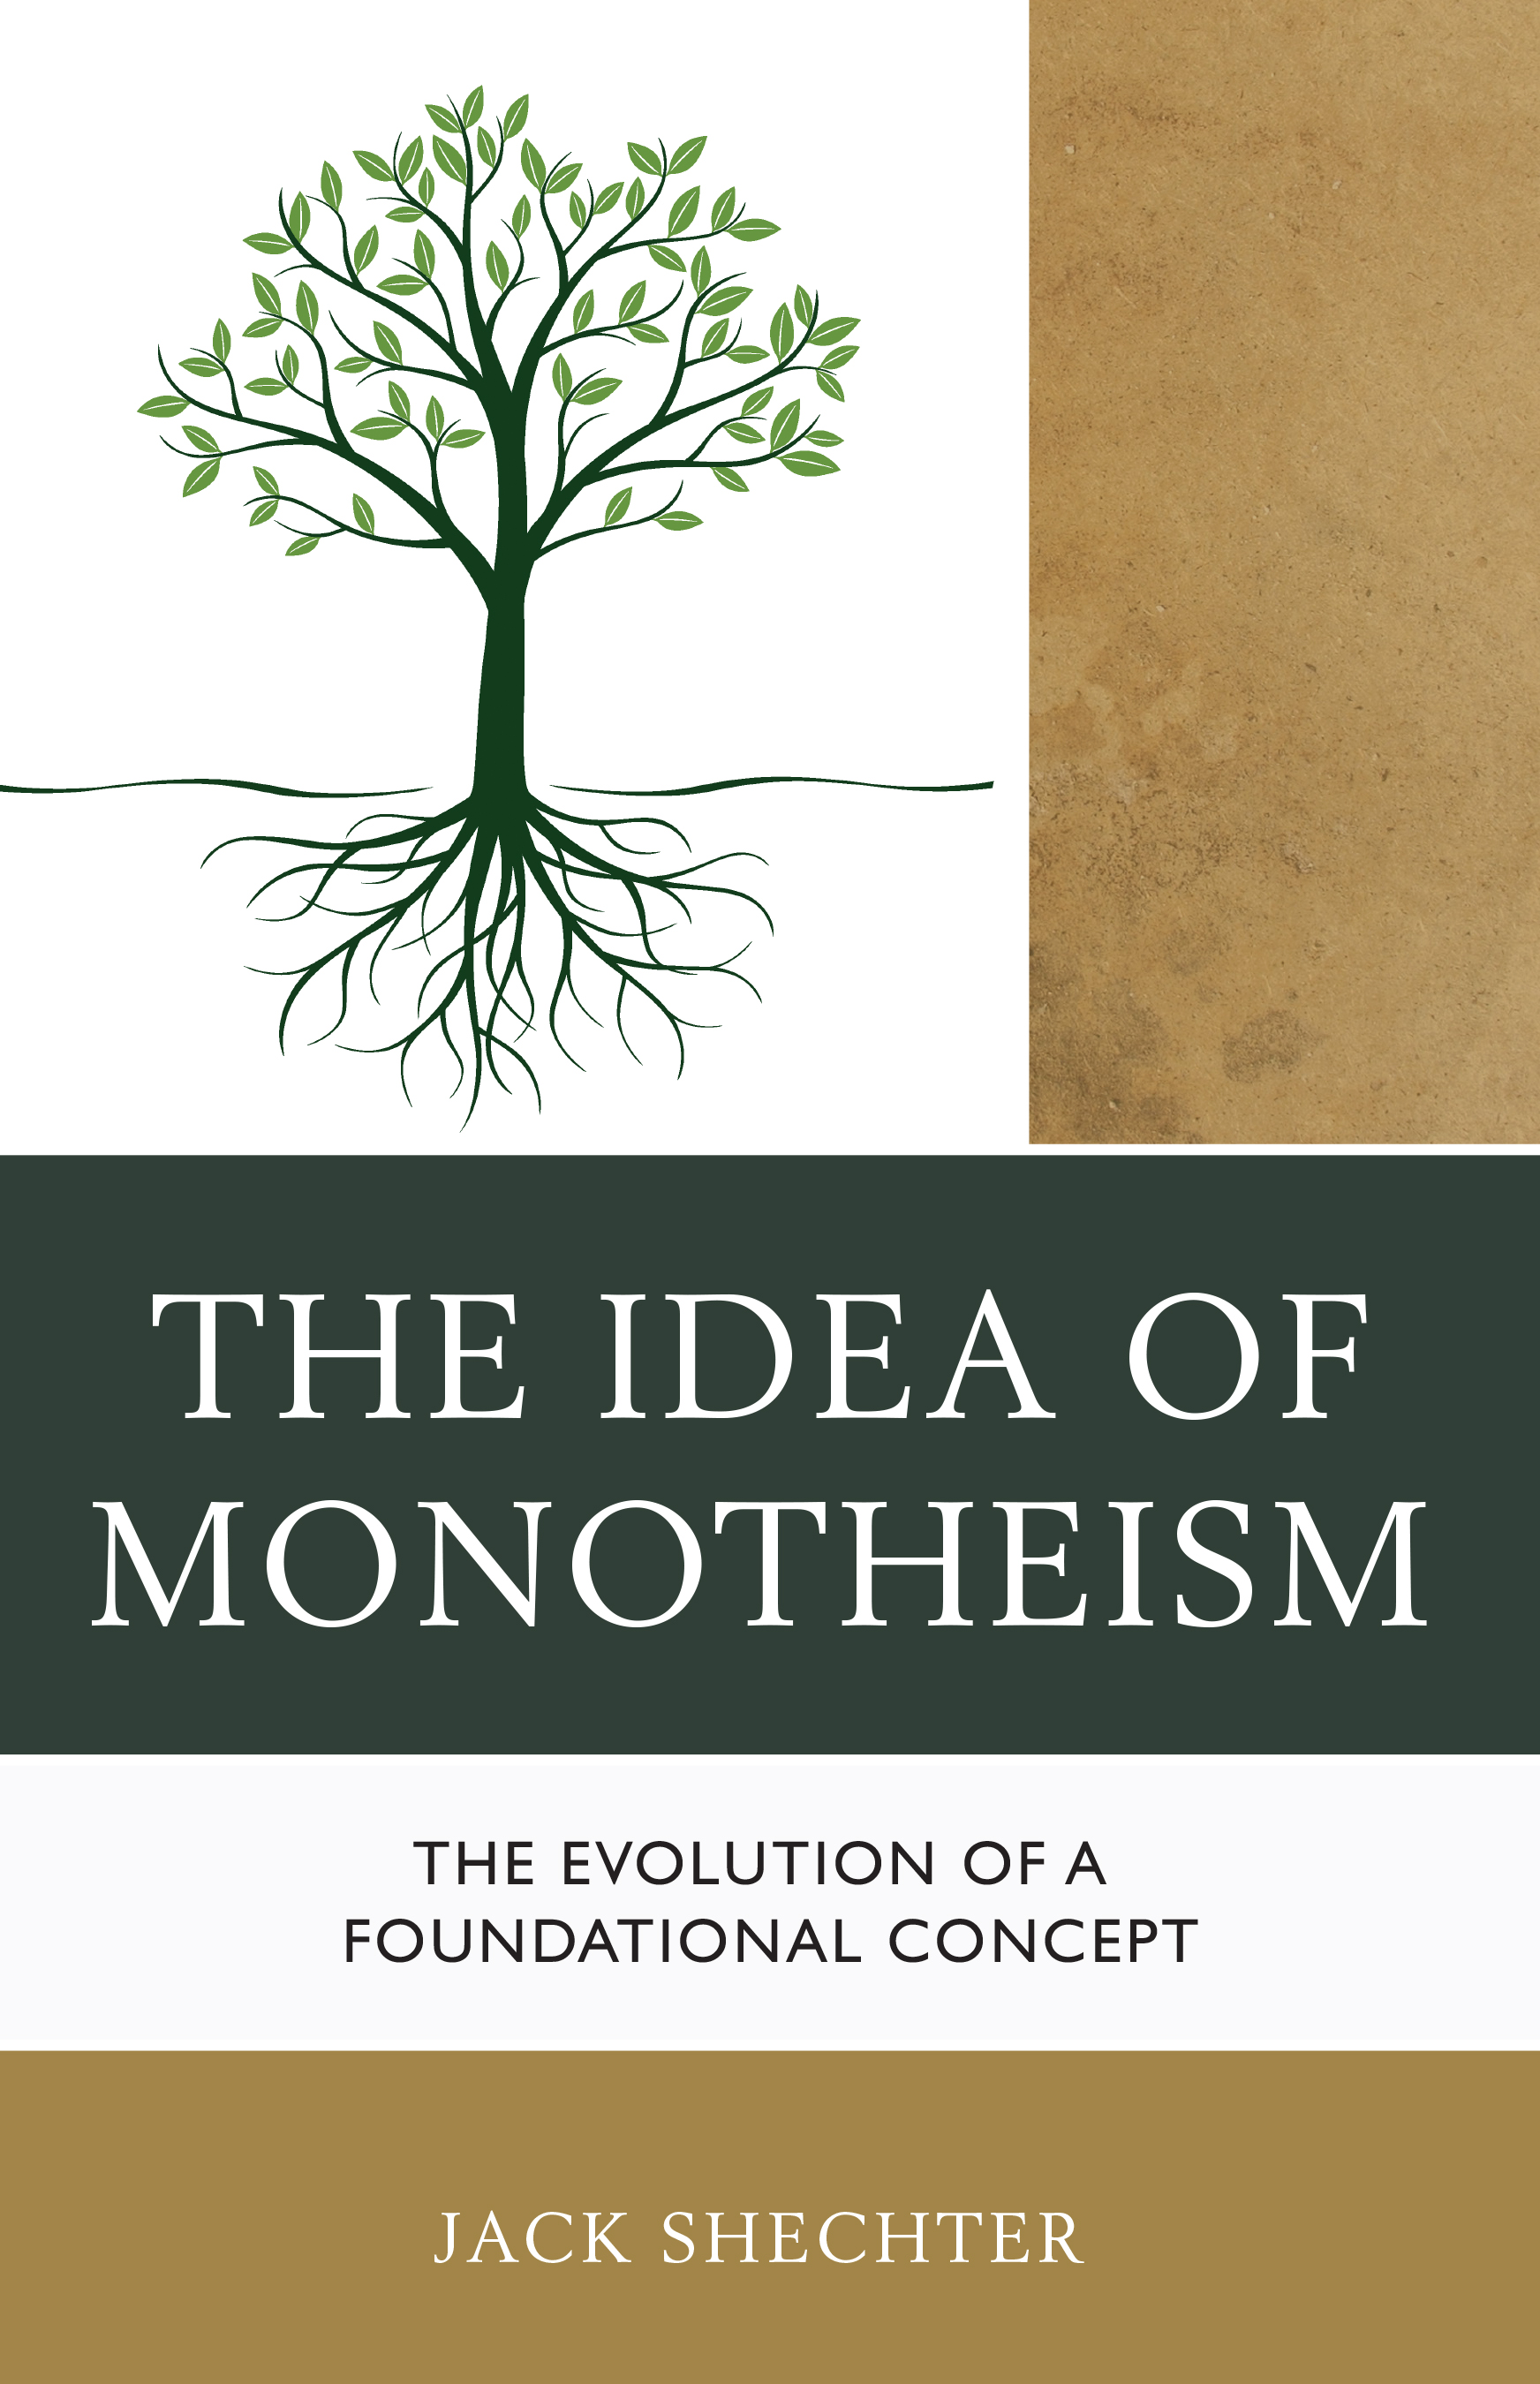 The Idea of Monotheism: The Evolution of a Foundational Concept